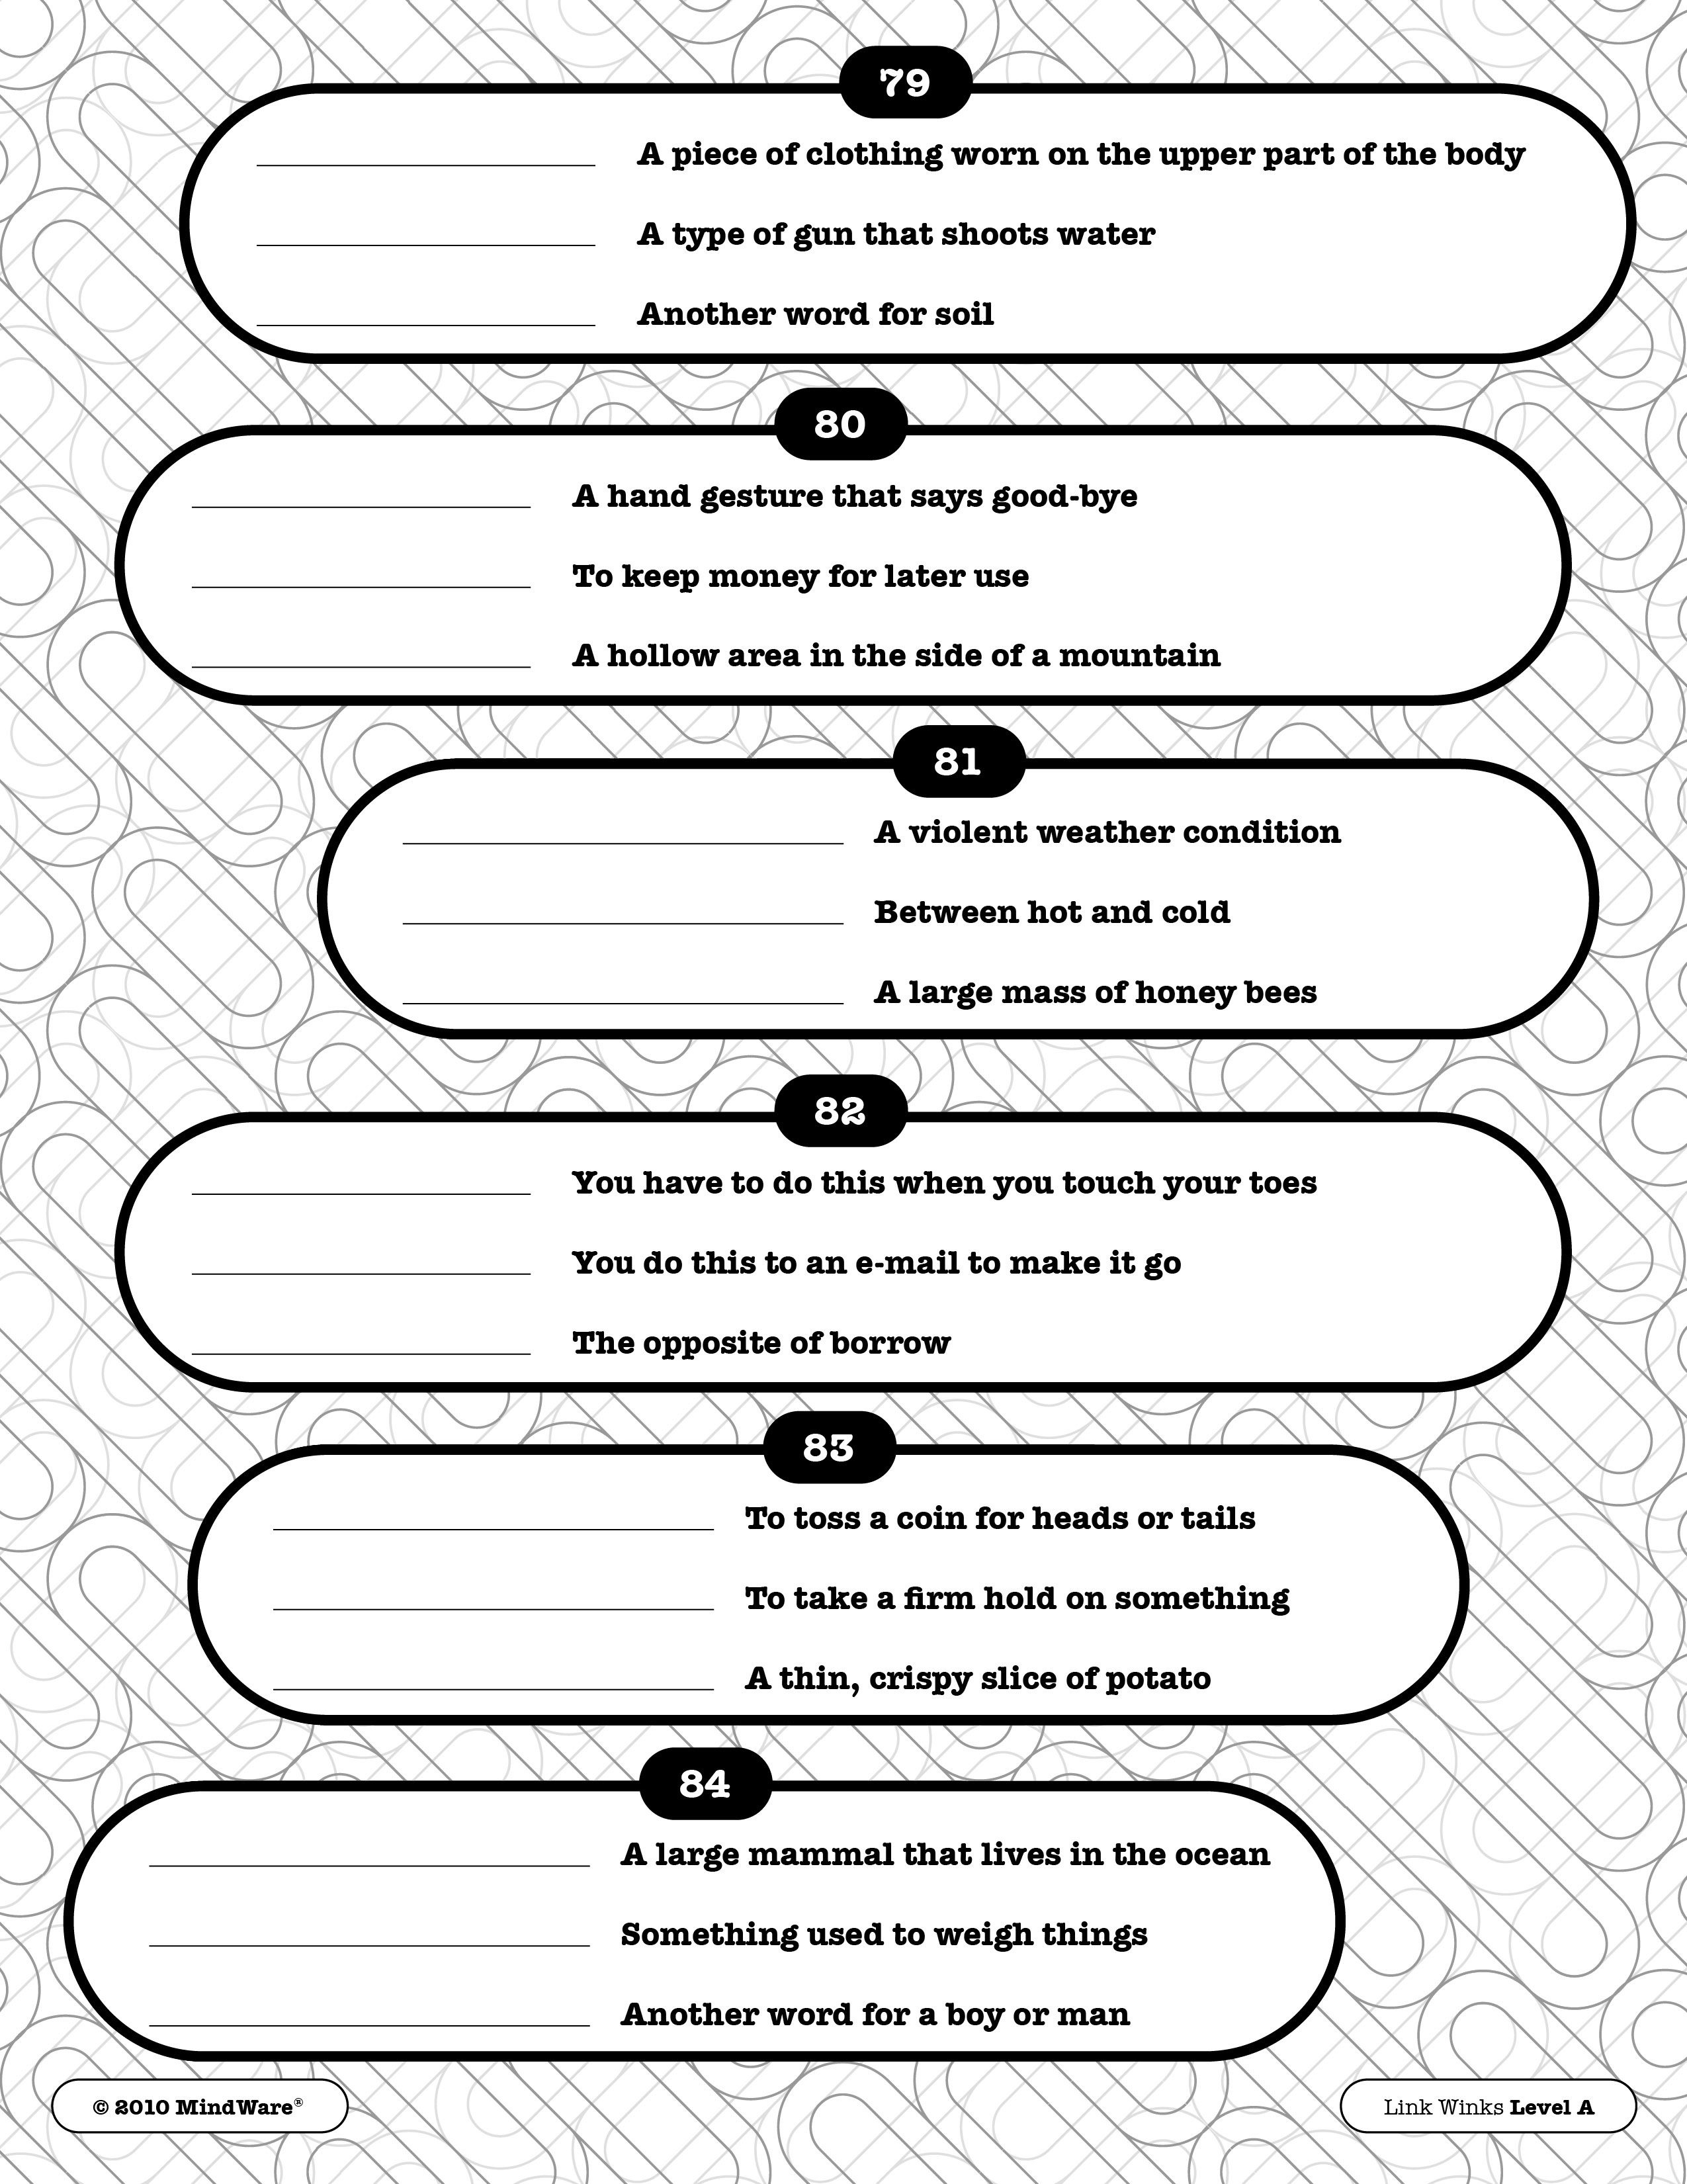 Get Your Brain Moving With A Page From Our Link Winks Level A Book - Free Printable Word Winks